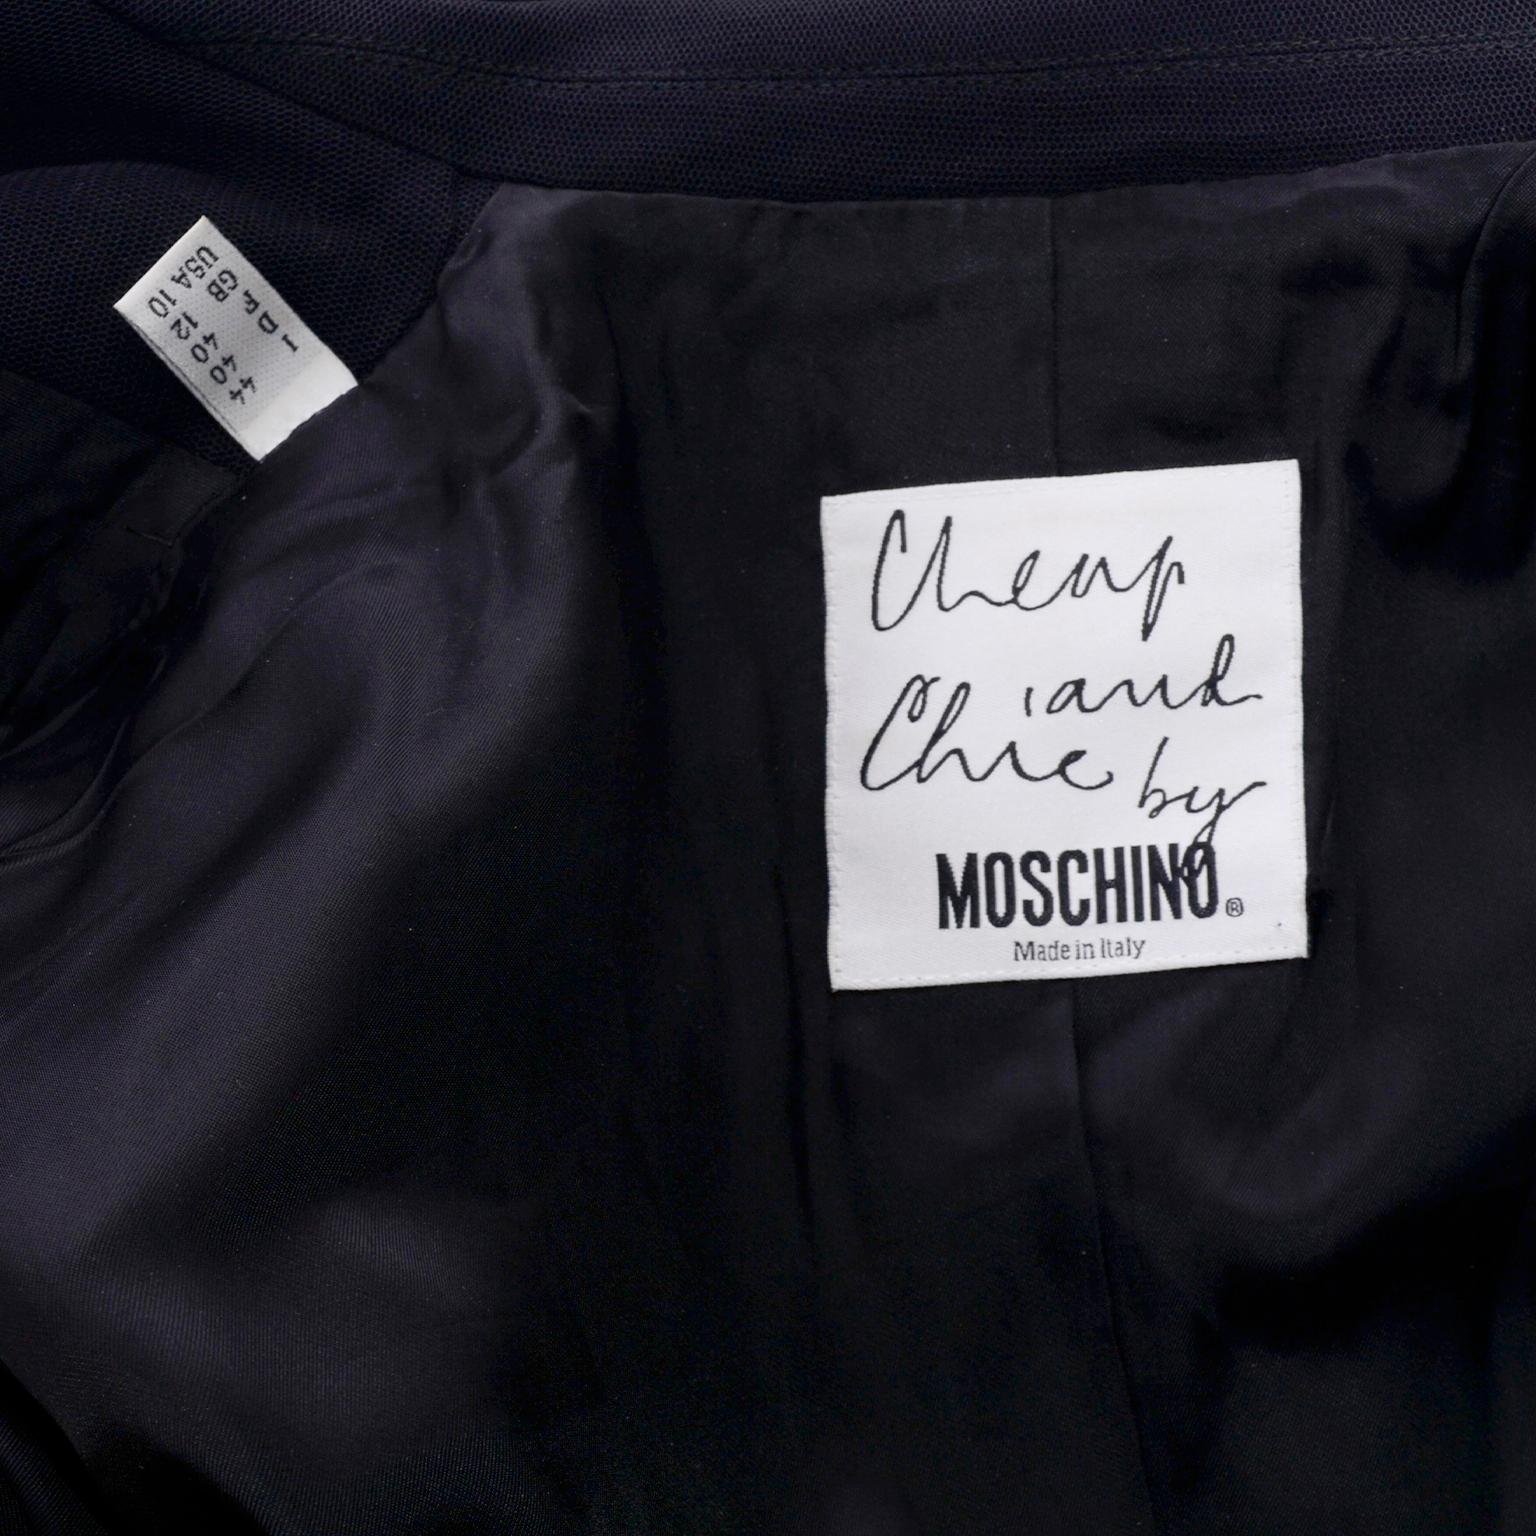 Women's Vintage Moschino Black Blazer With Fine Netting and Gold Sequins